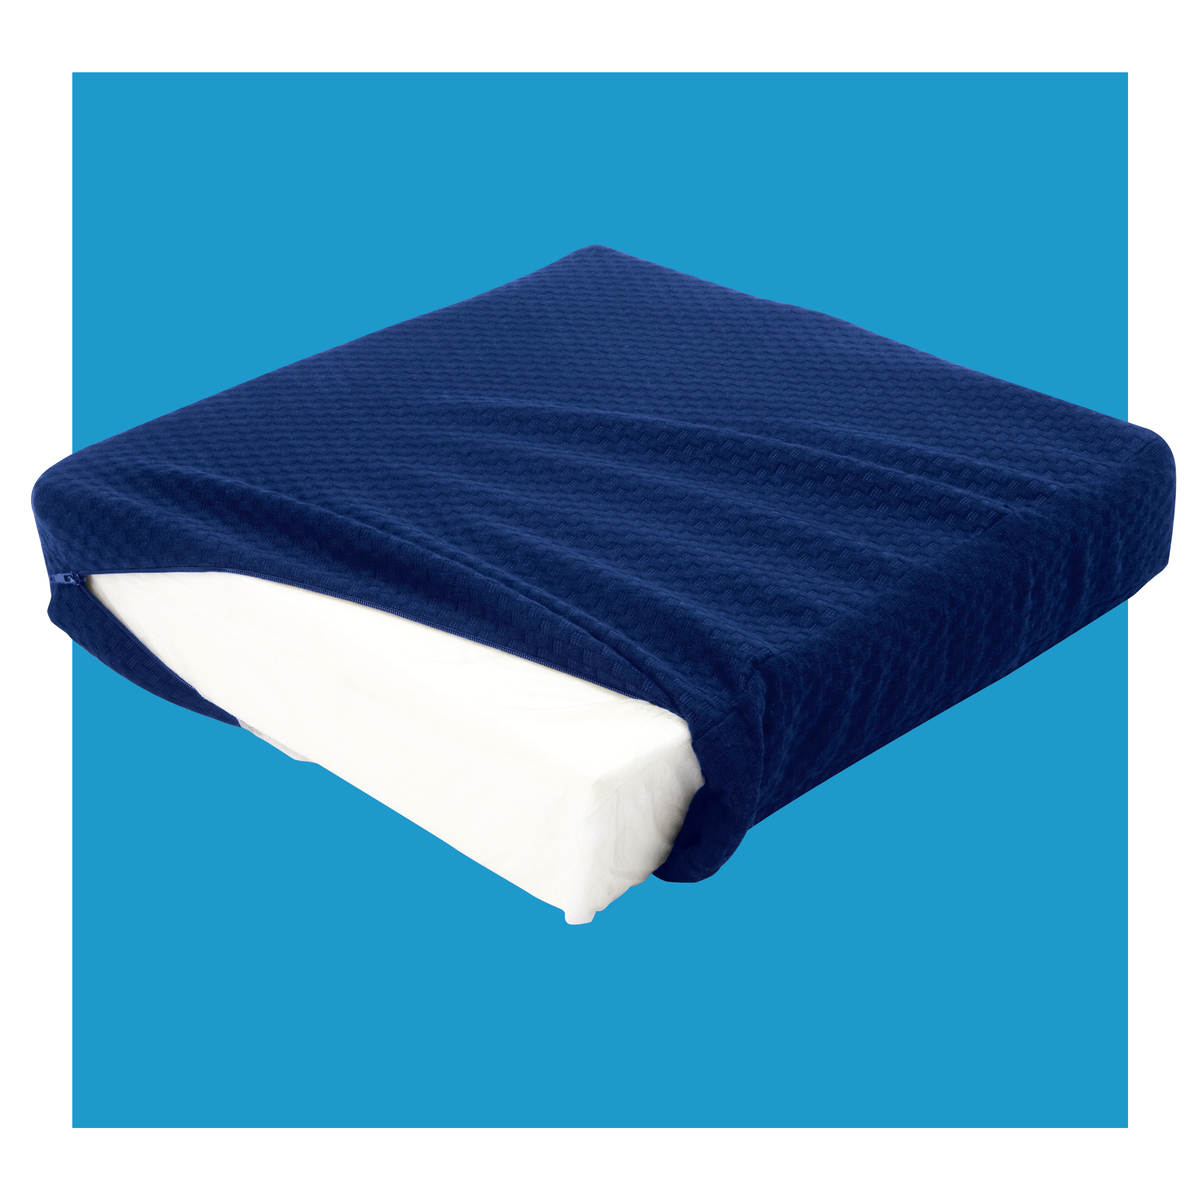 A blue cushion with its cover half off showing a removable cover